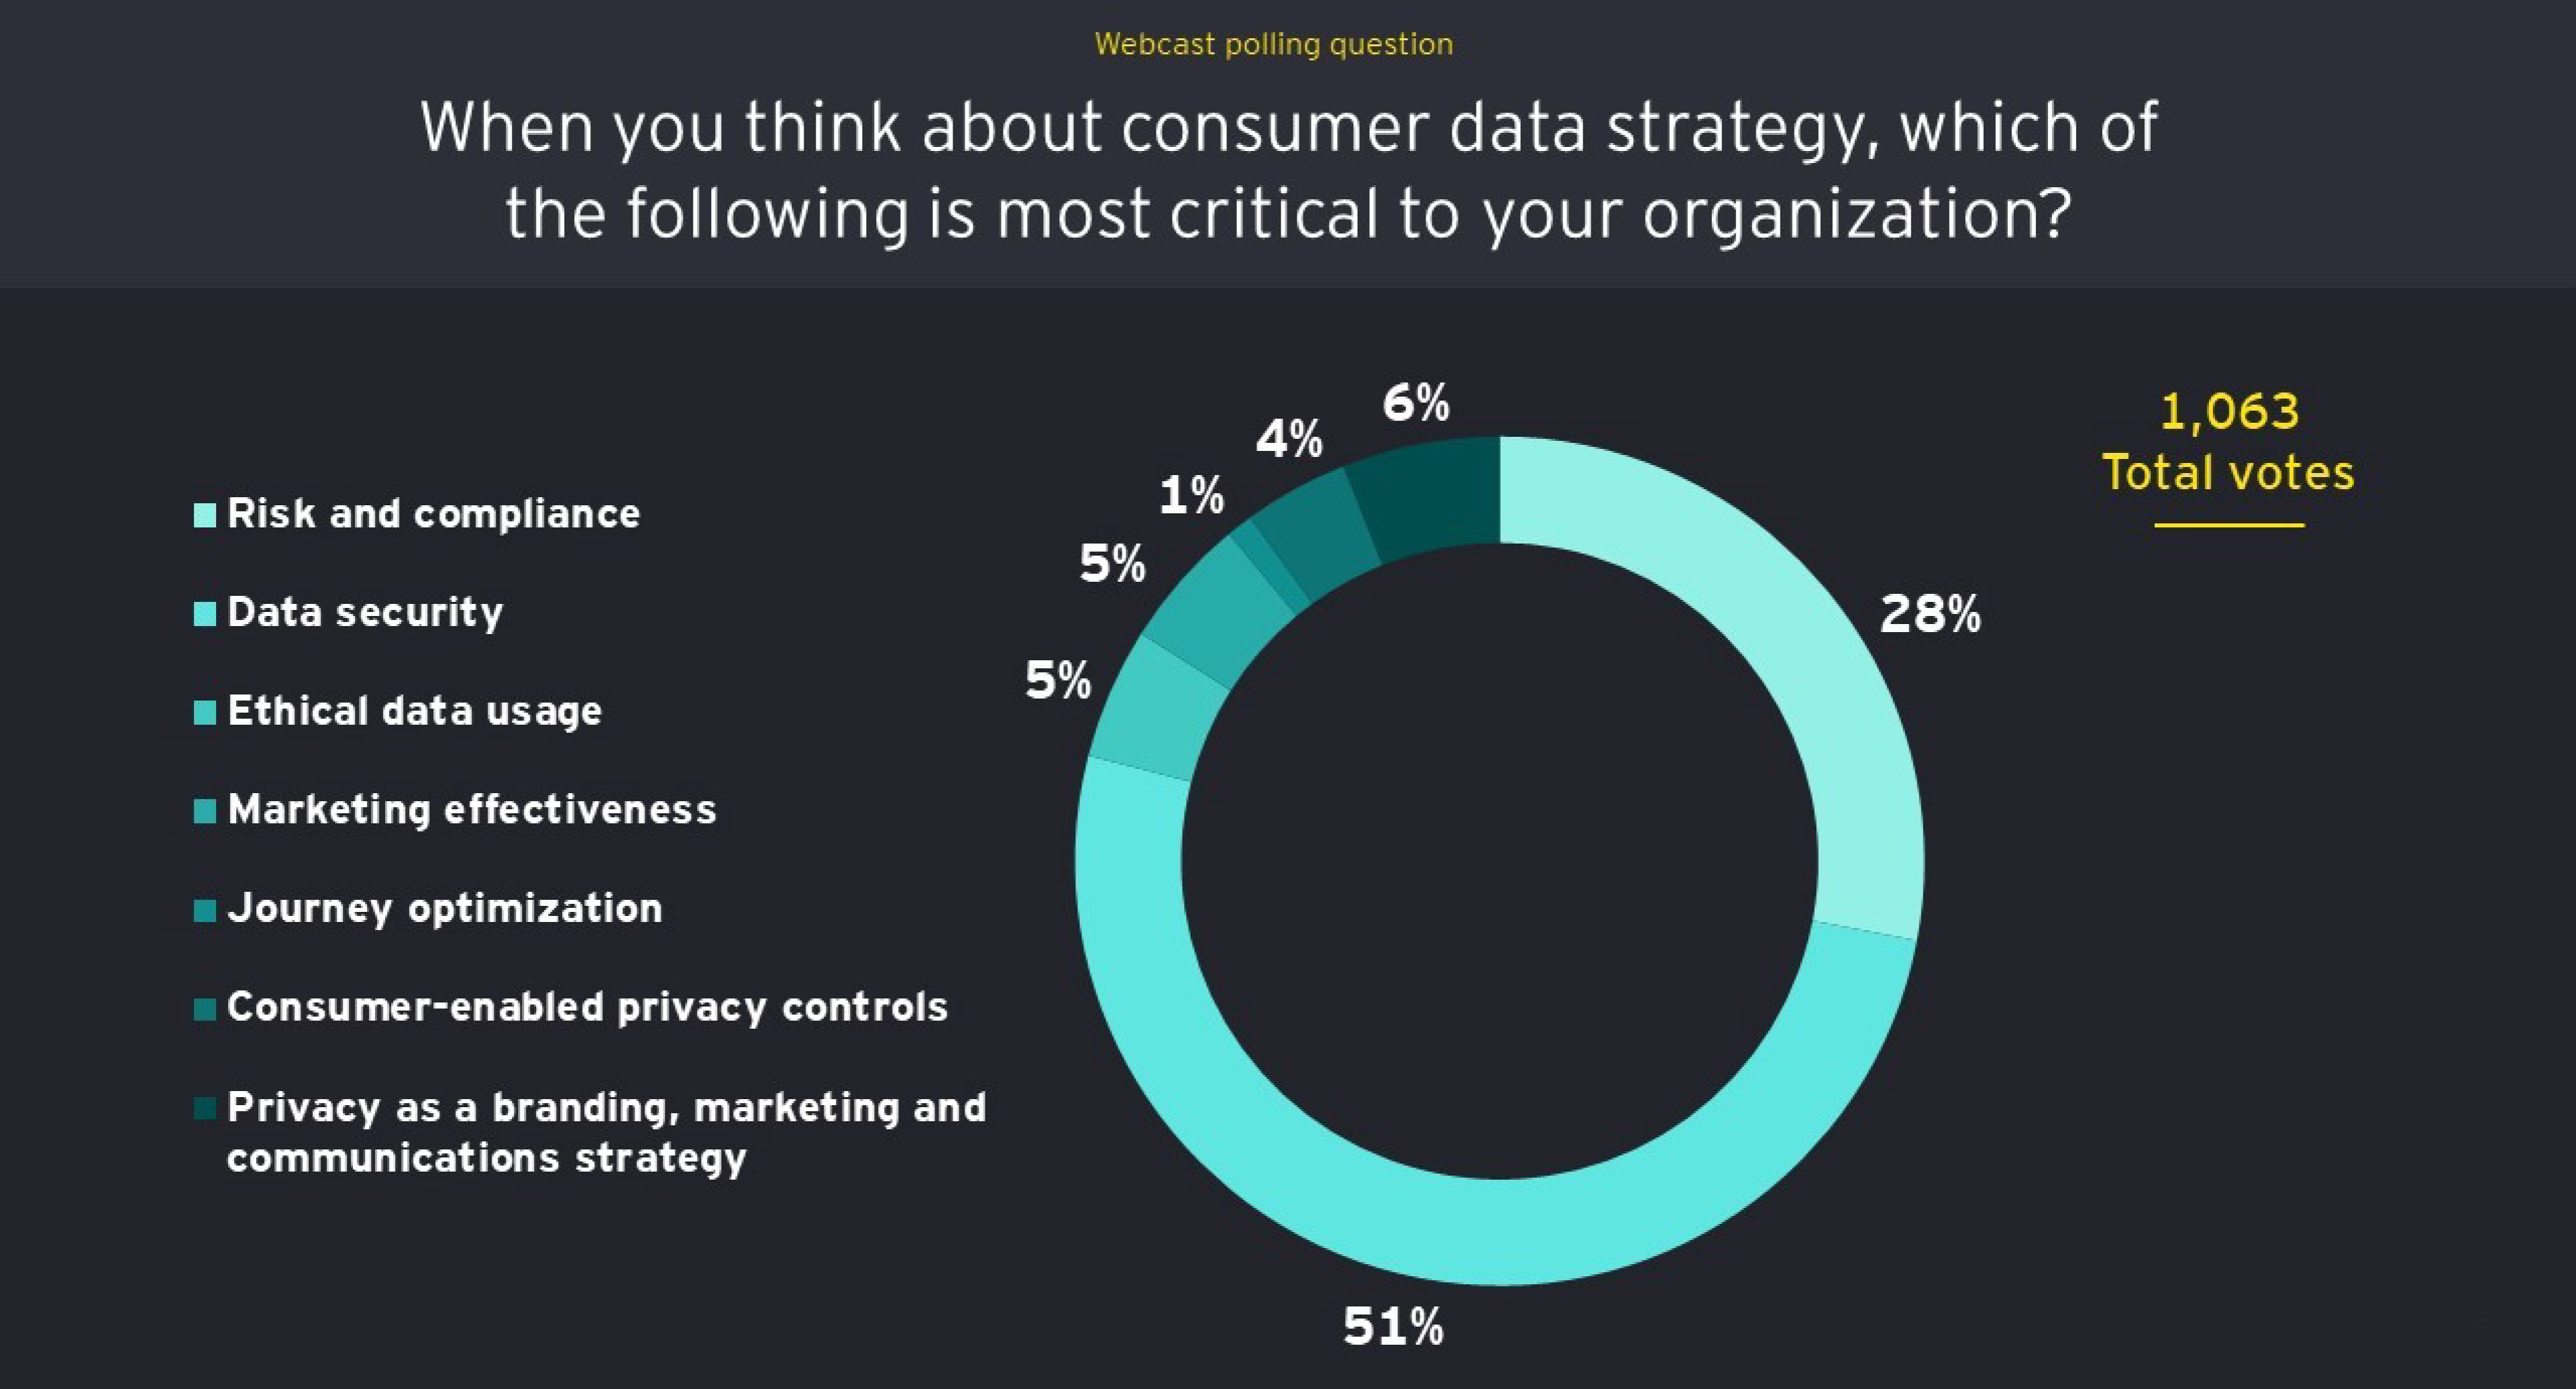 Consumer data privacy is about trust and transparency